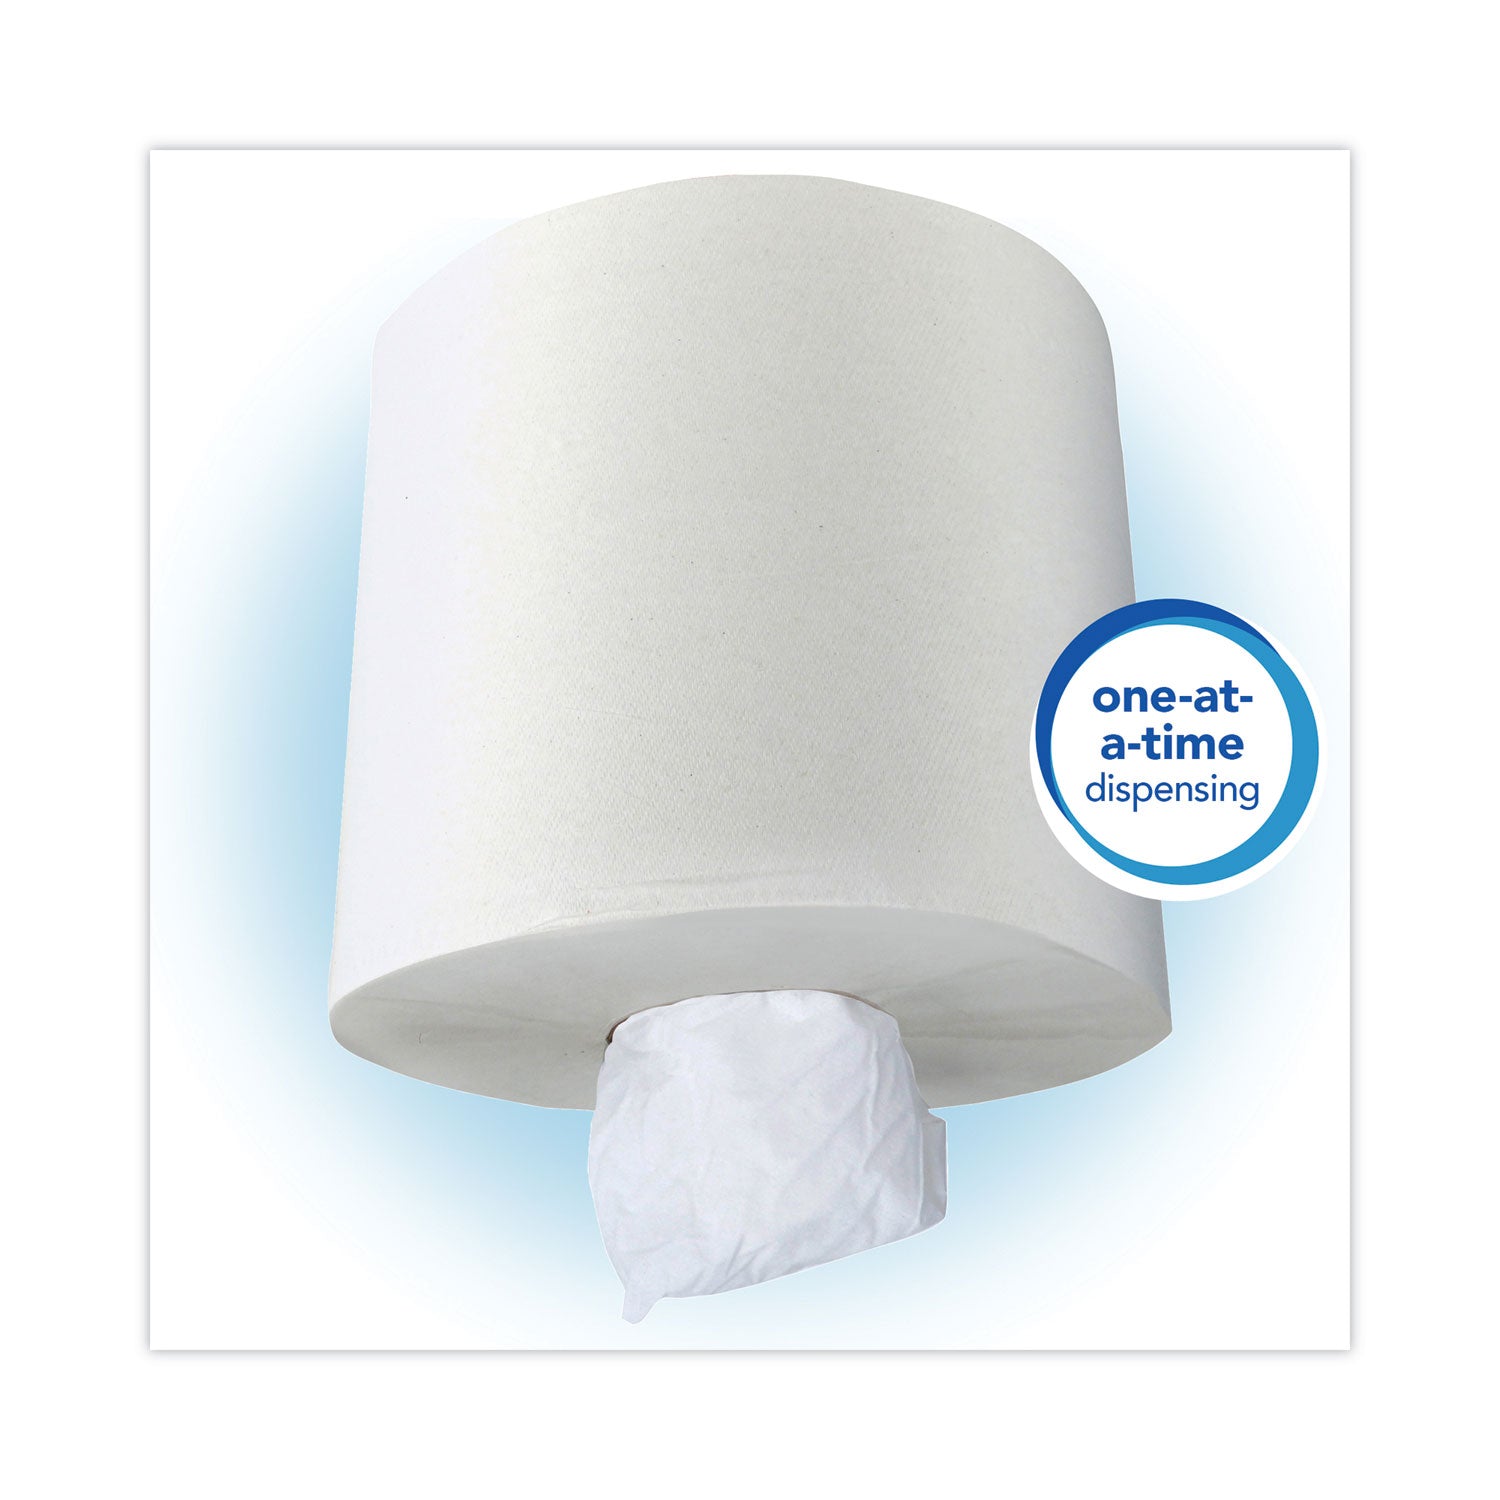 Essential Roll Center-Pull Towels, 1-Ply, 8 x 12, White, 700/Roll, 6 Rolls/Carton - 